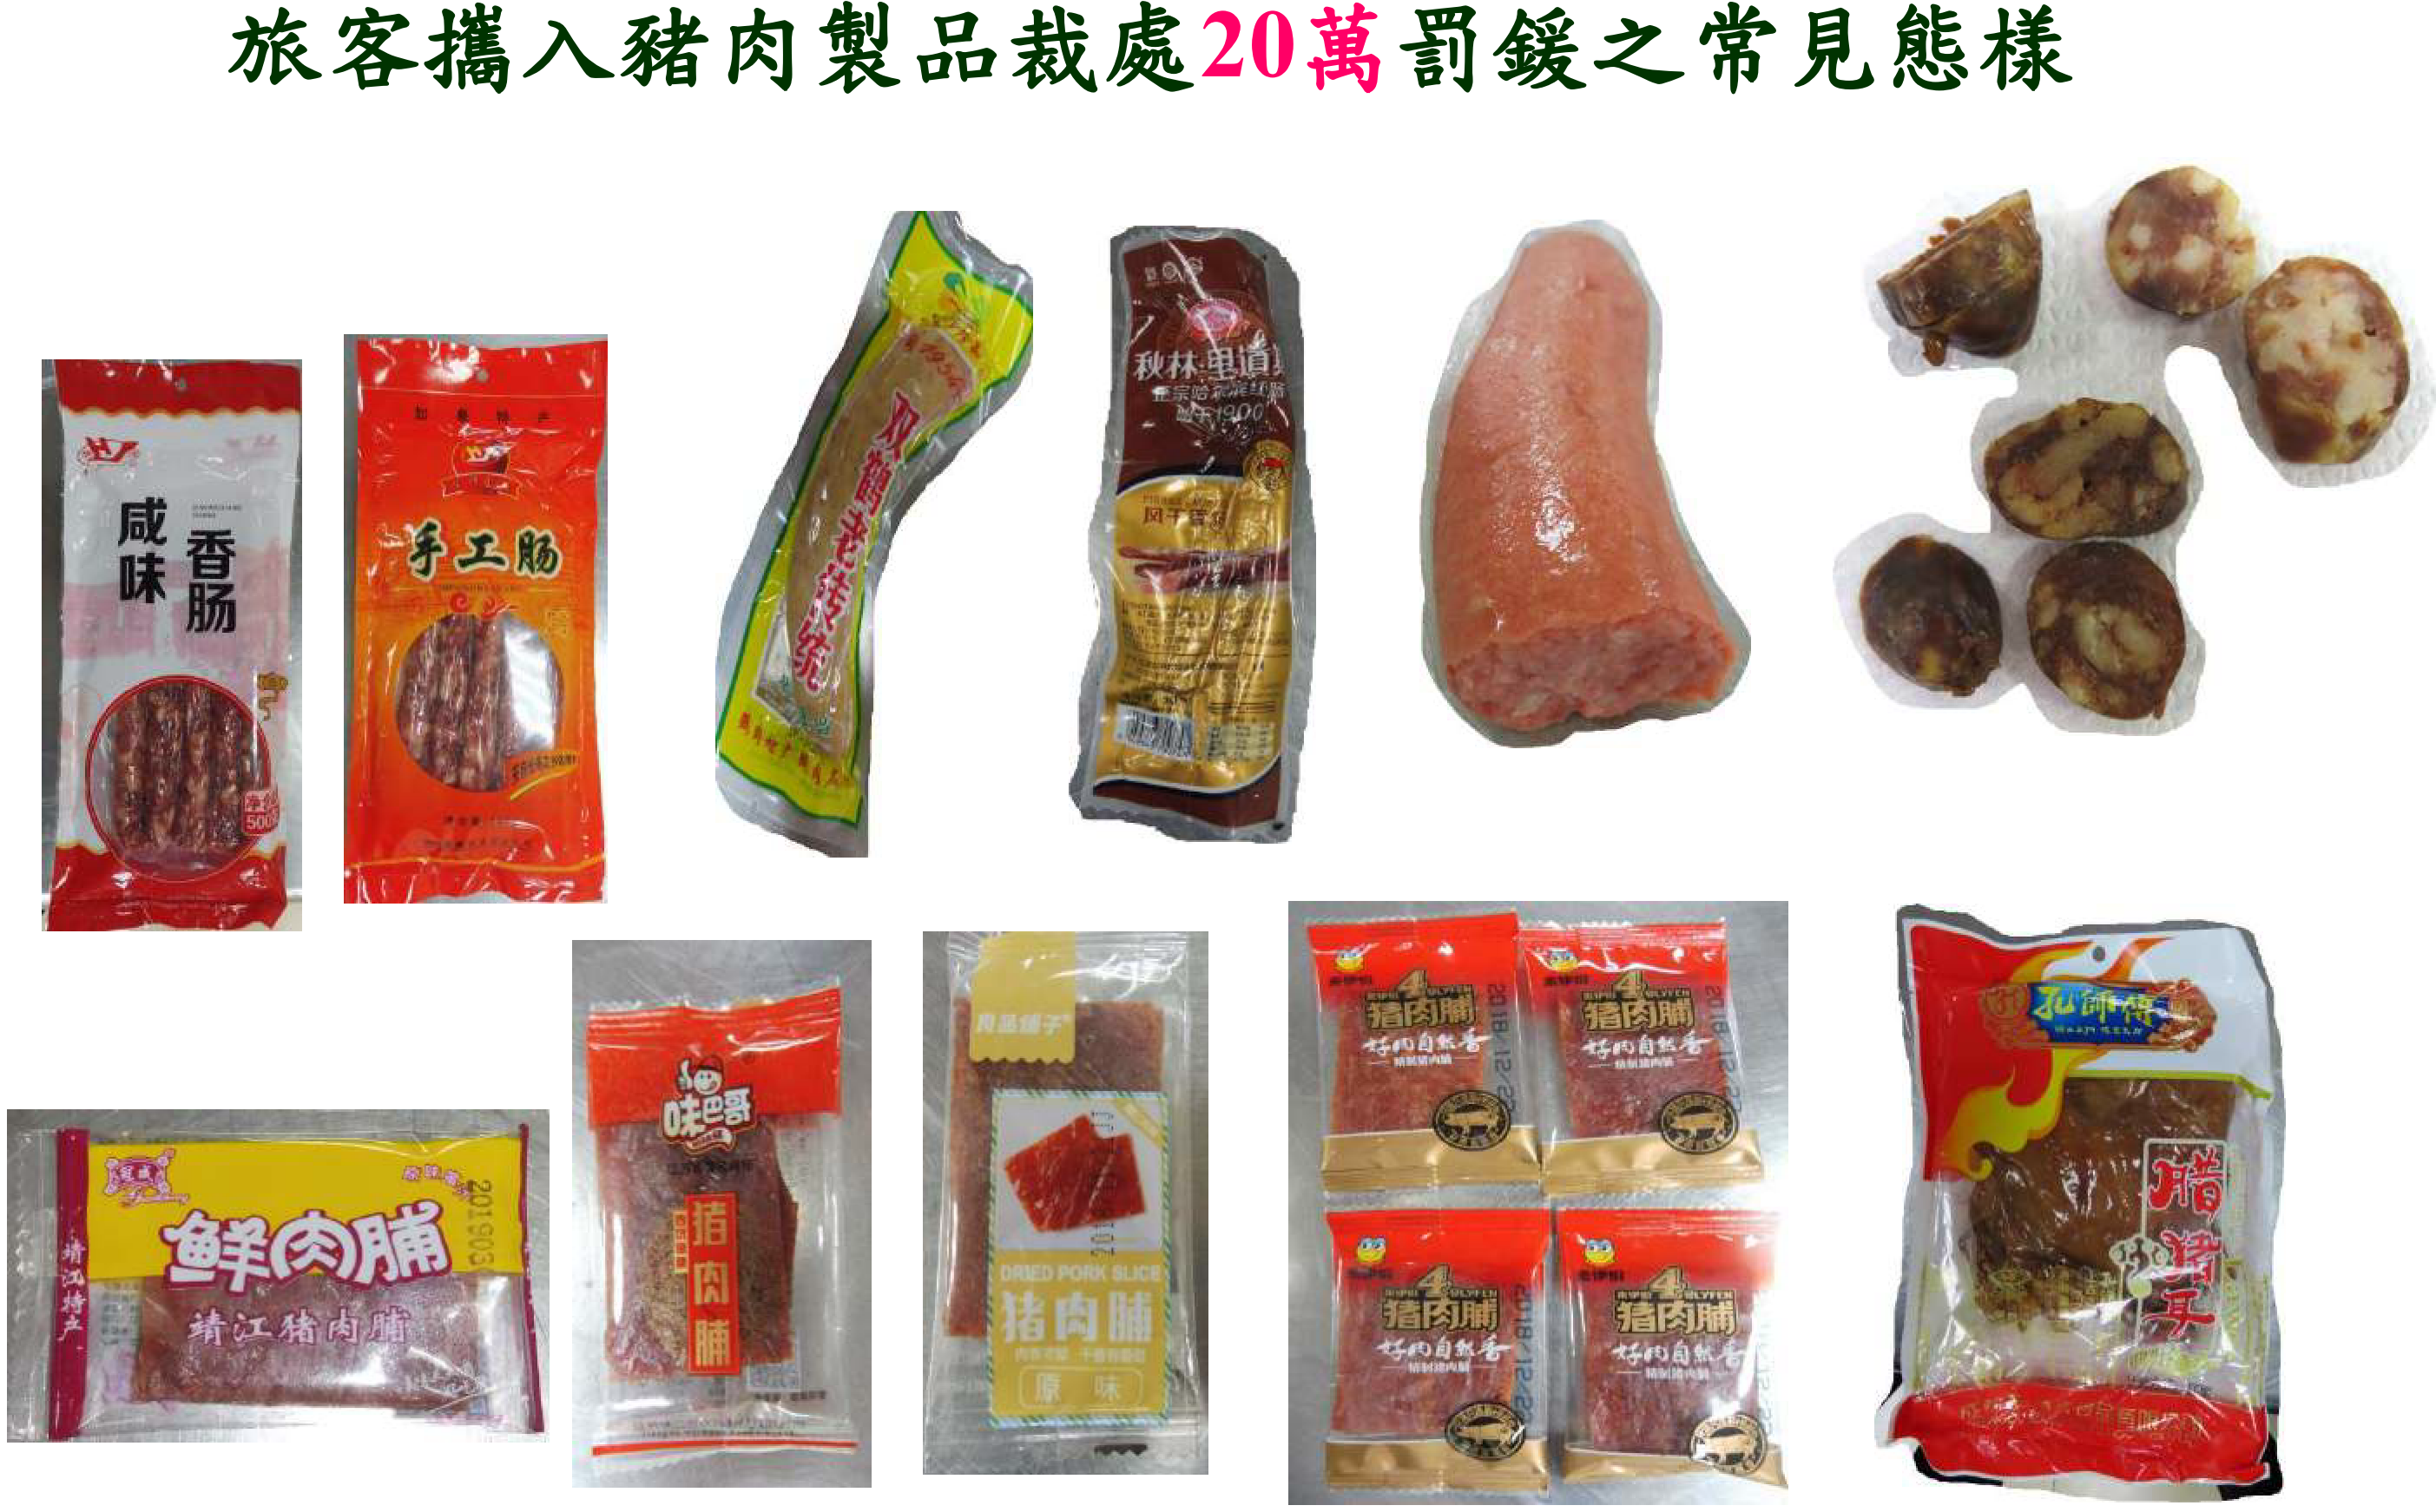 Foreign pork products prohibited from entering Taiwan